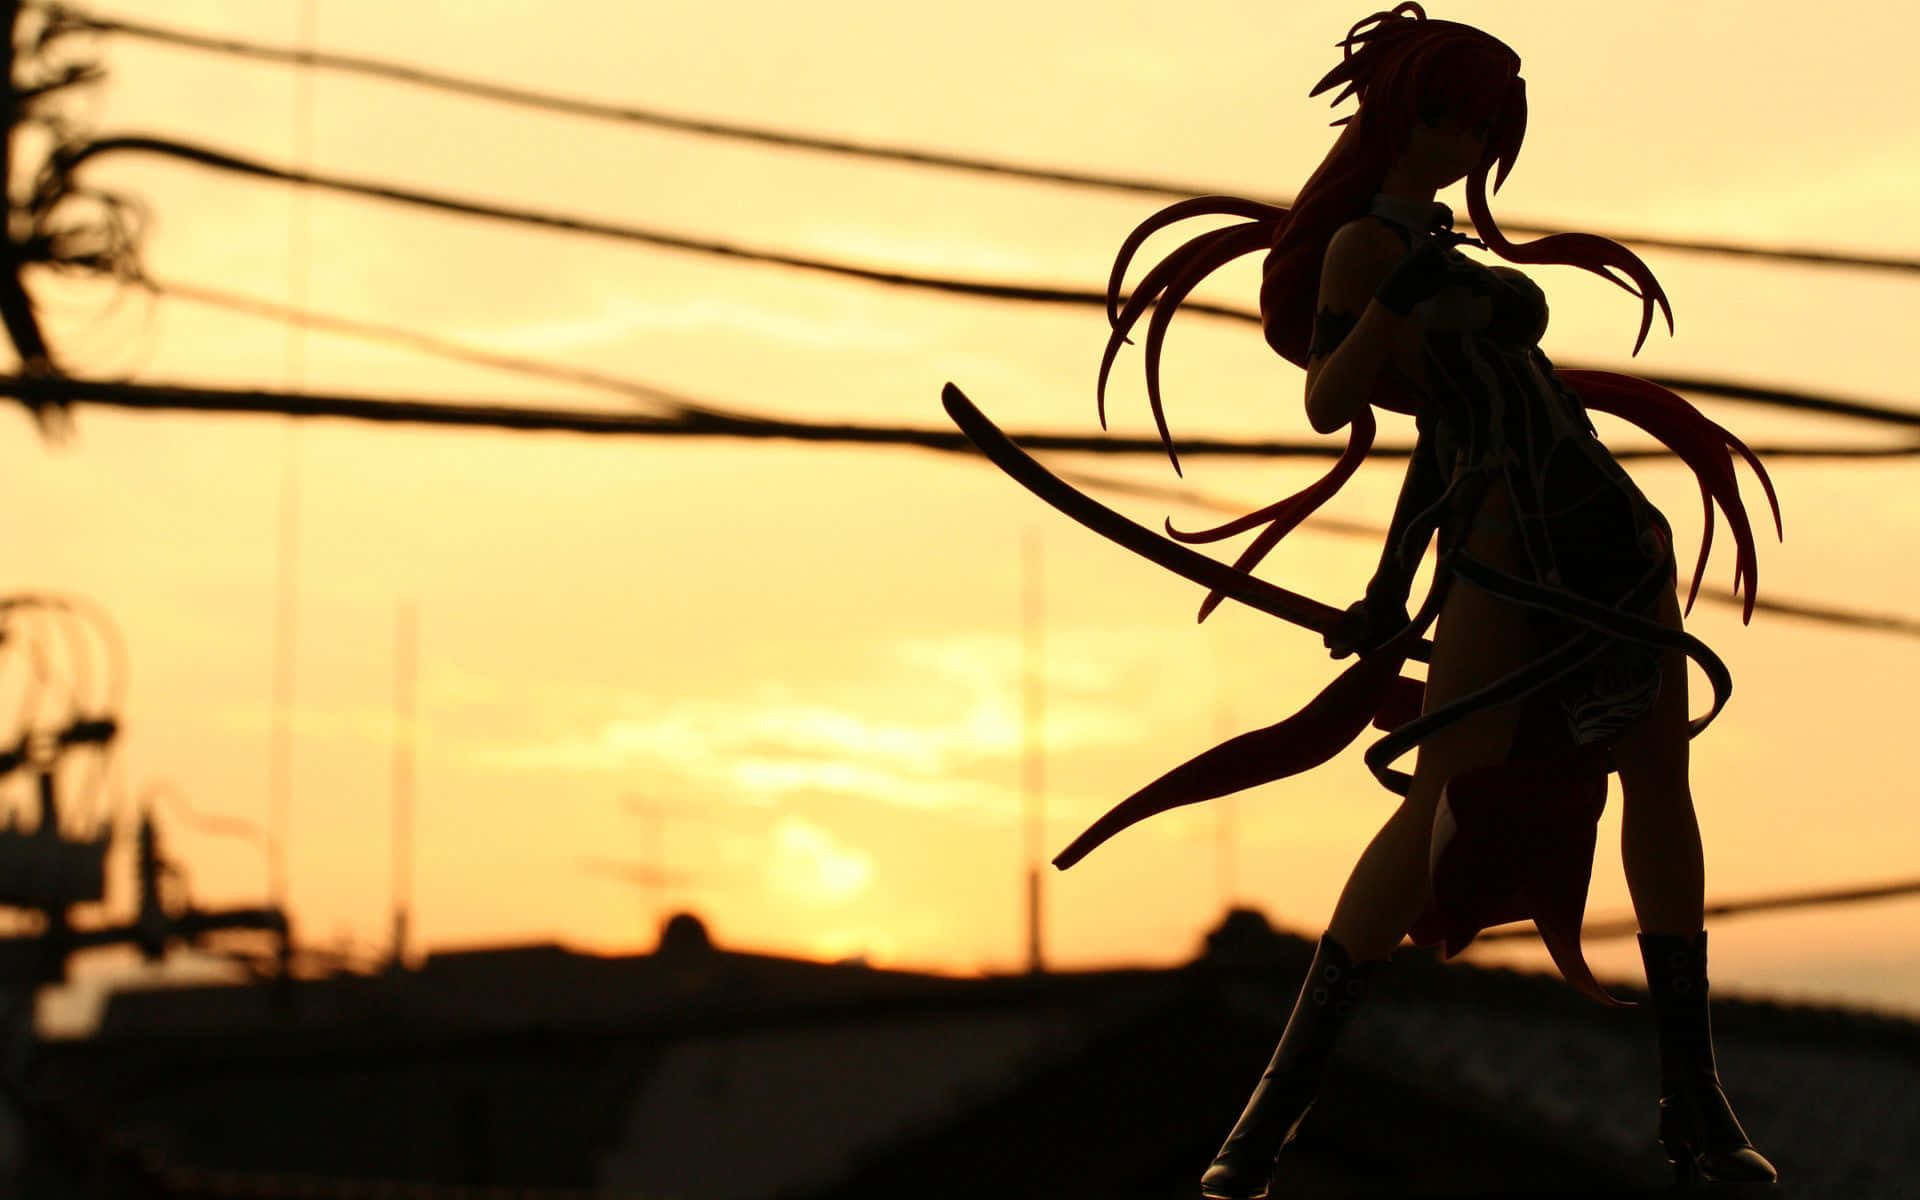 A beautiful girl stands in silhouette against a scenic background.